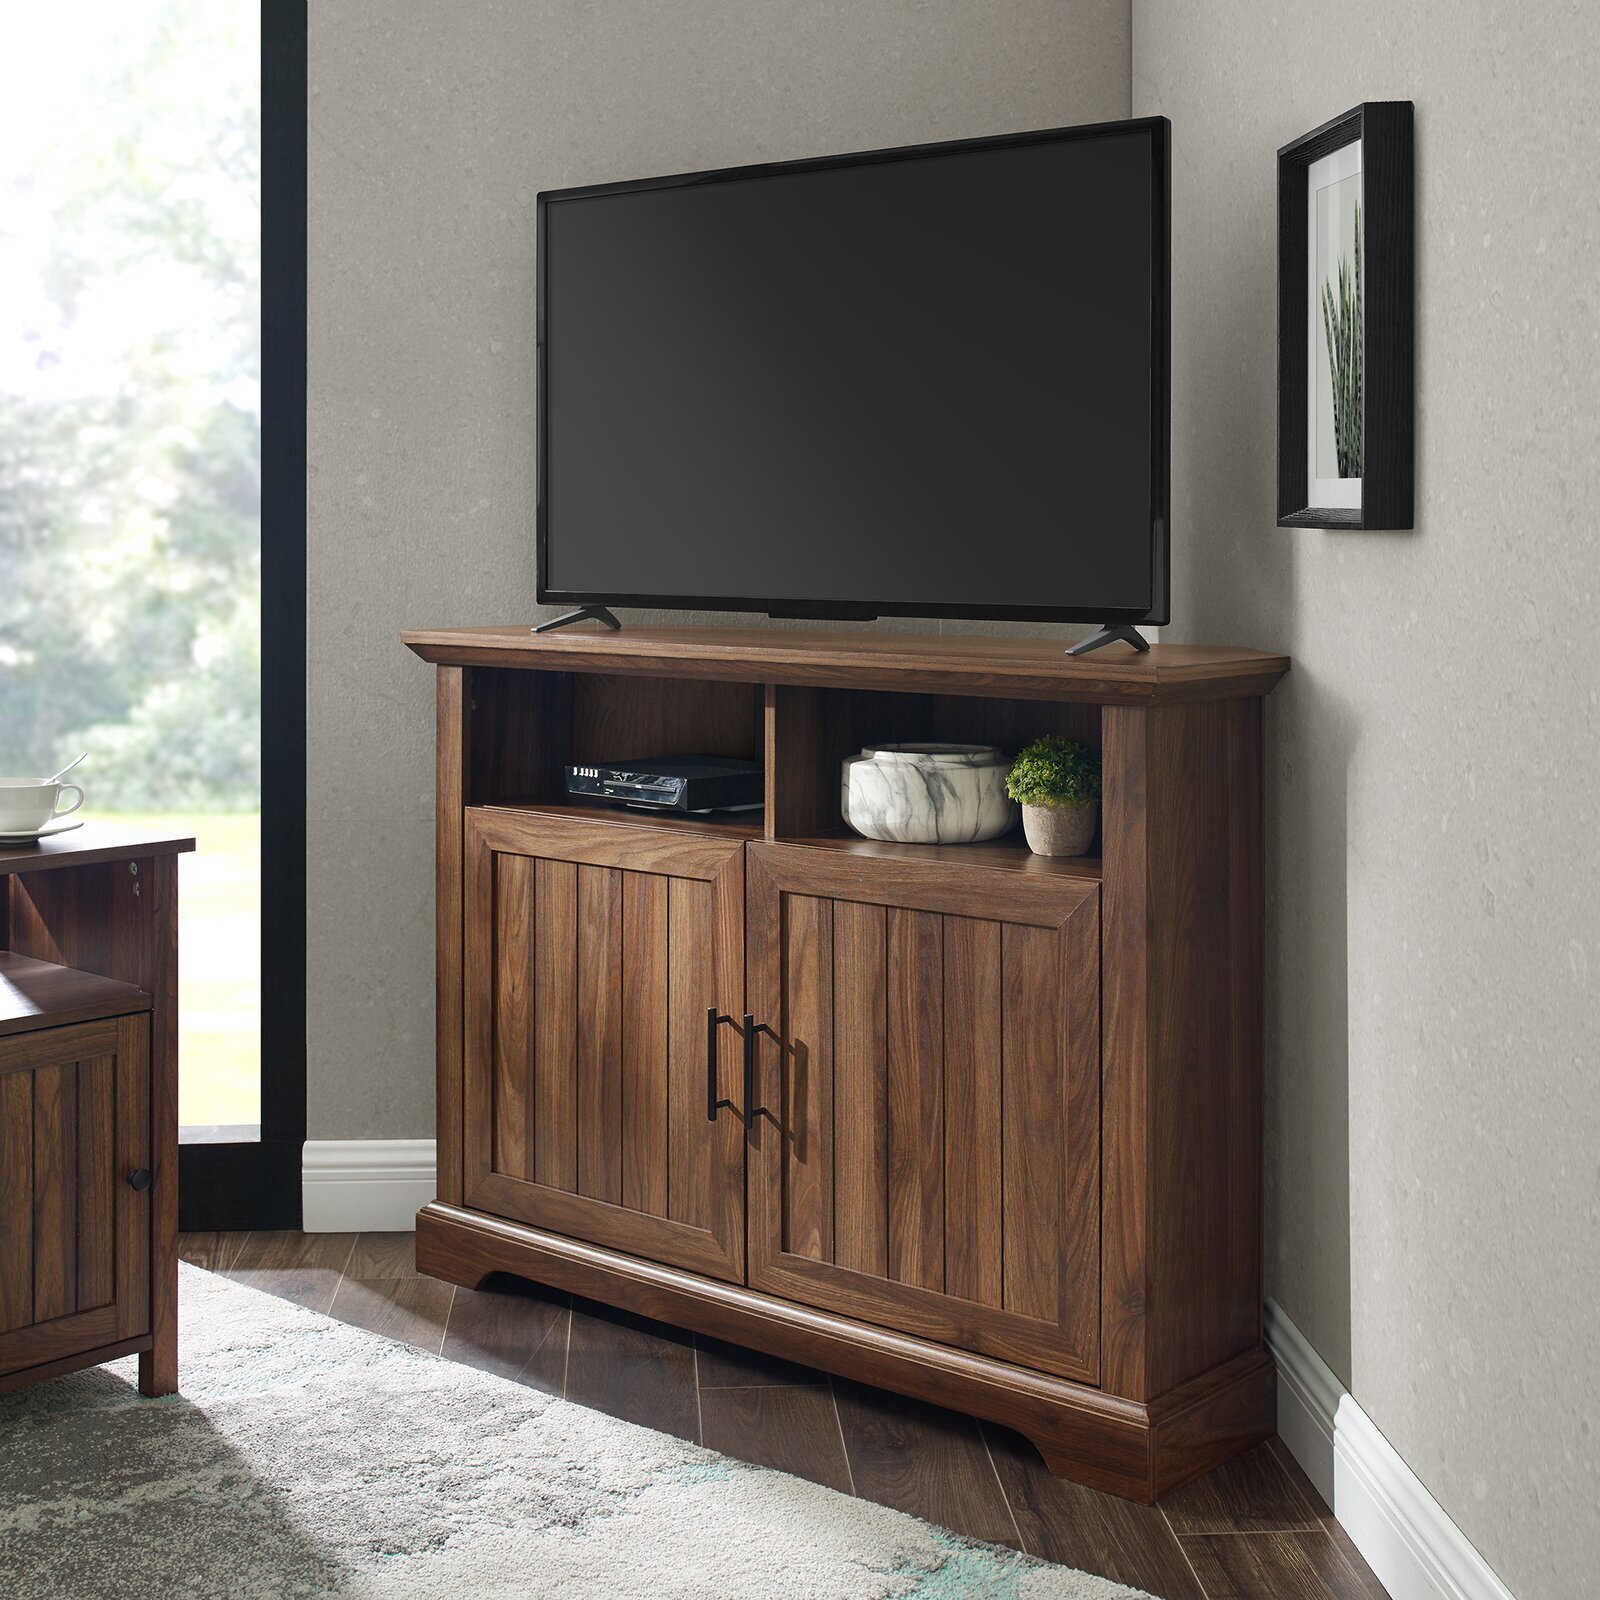 Details about   Handcrafted Solid Wood Corner Media Cabinet   